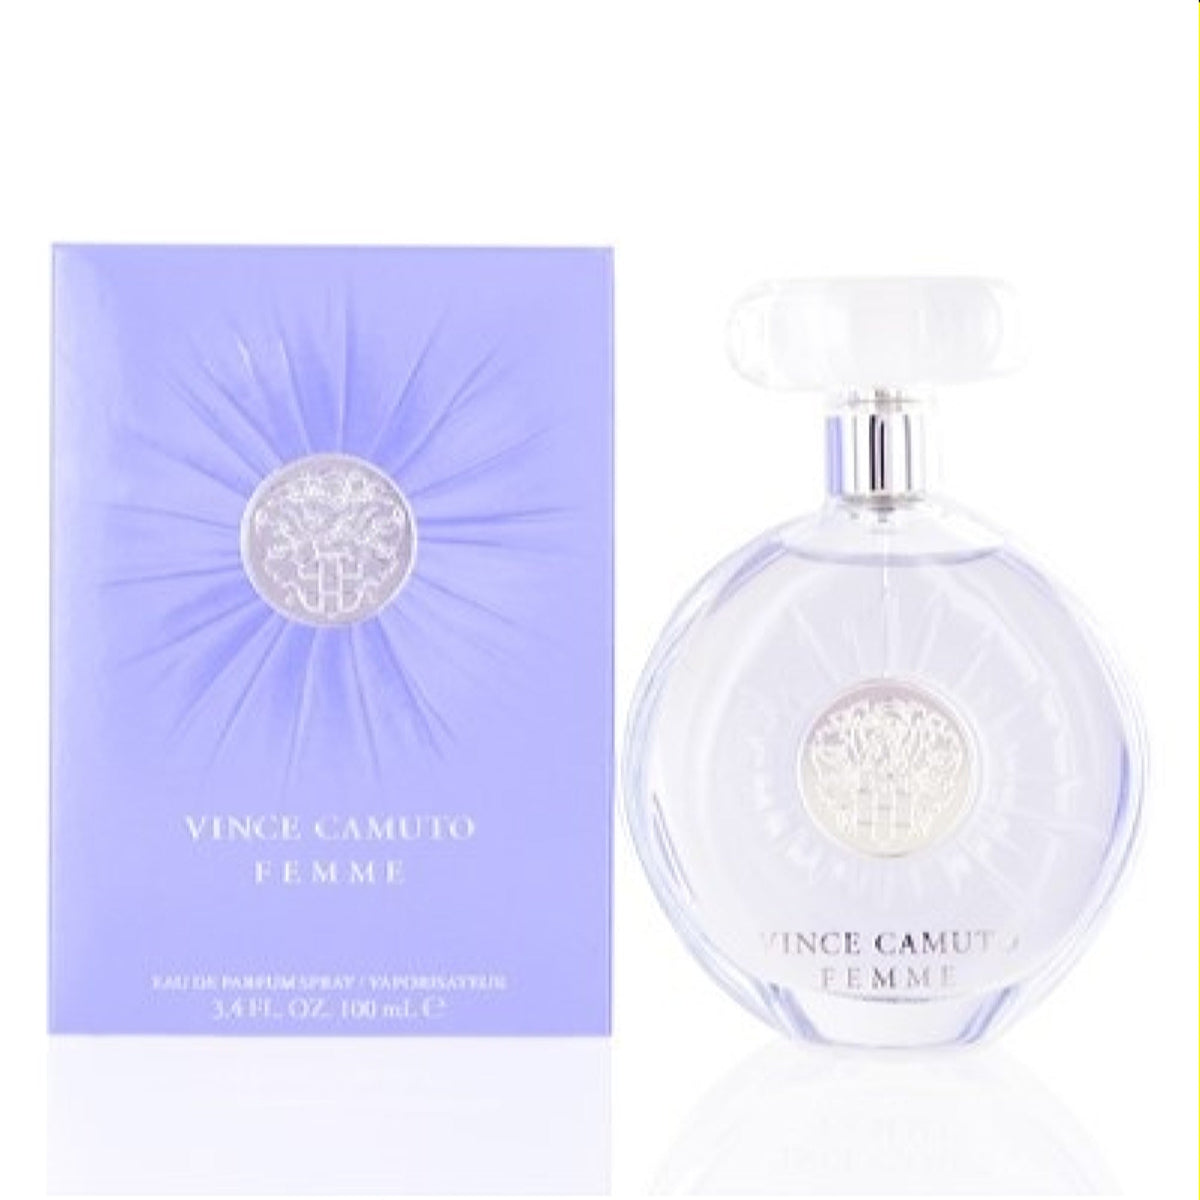 Femme Vince Camuto Vince Camuto Edp Spray 3.4 Oz (100 Ml) For Women  213632776